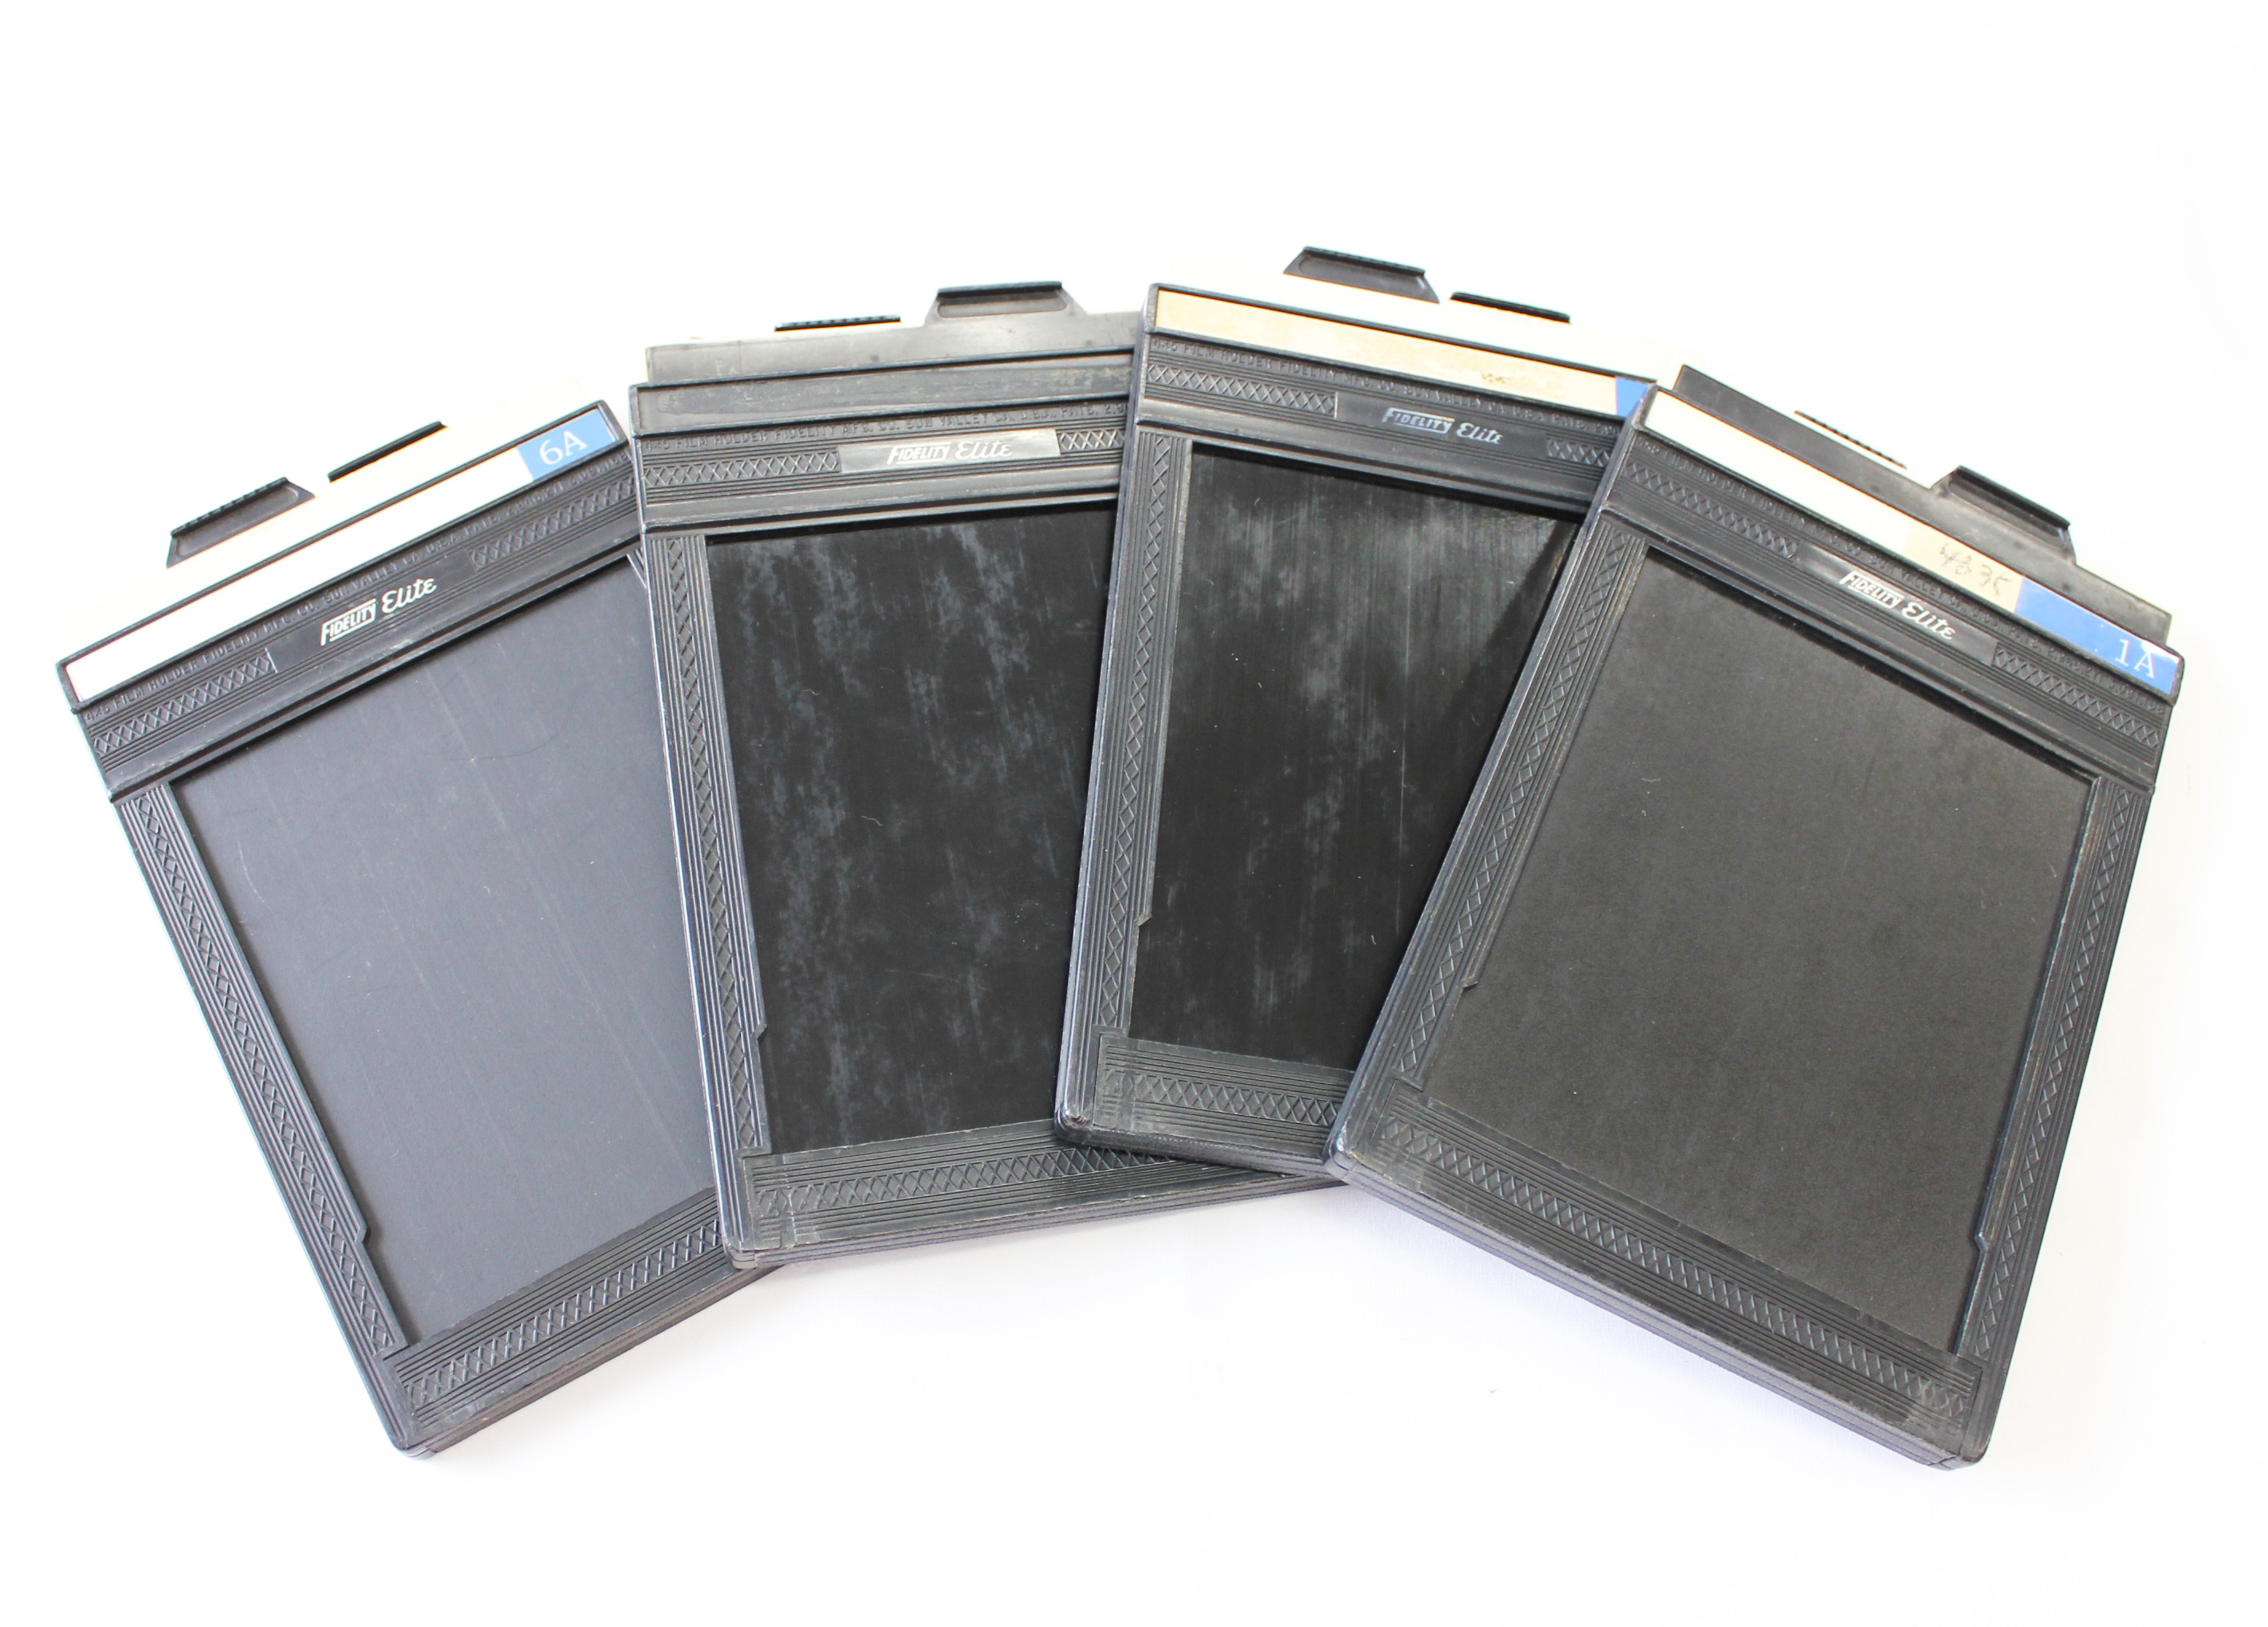 Japan Used Camera Shop | Fidelity 4x5 Cut Film Holder Lot of 4 from Japan